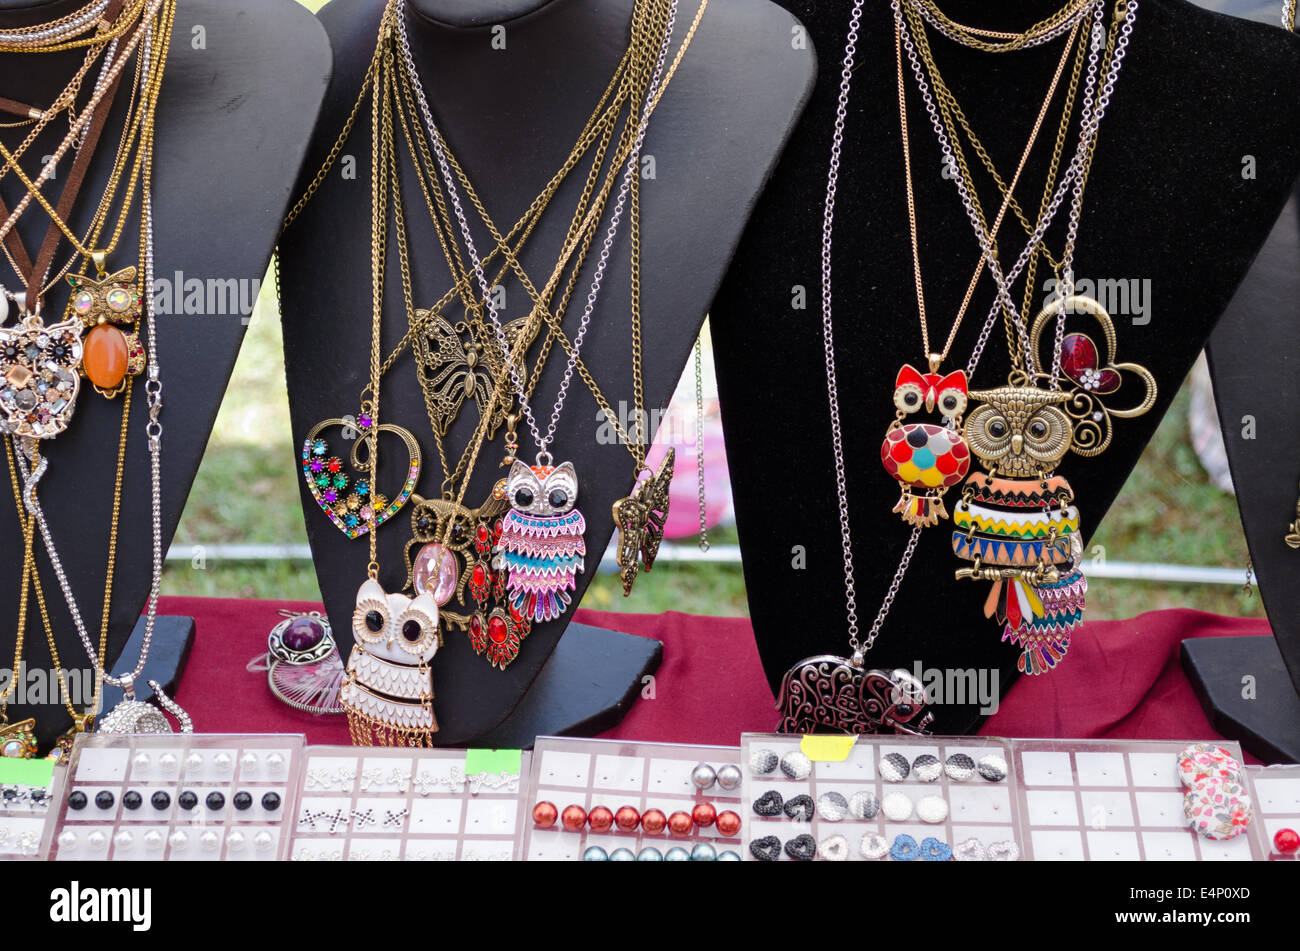 female owl shaped pendant necklaces and other decorations on three black stand city market Stock Photo